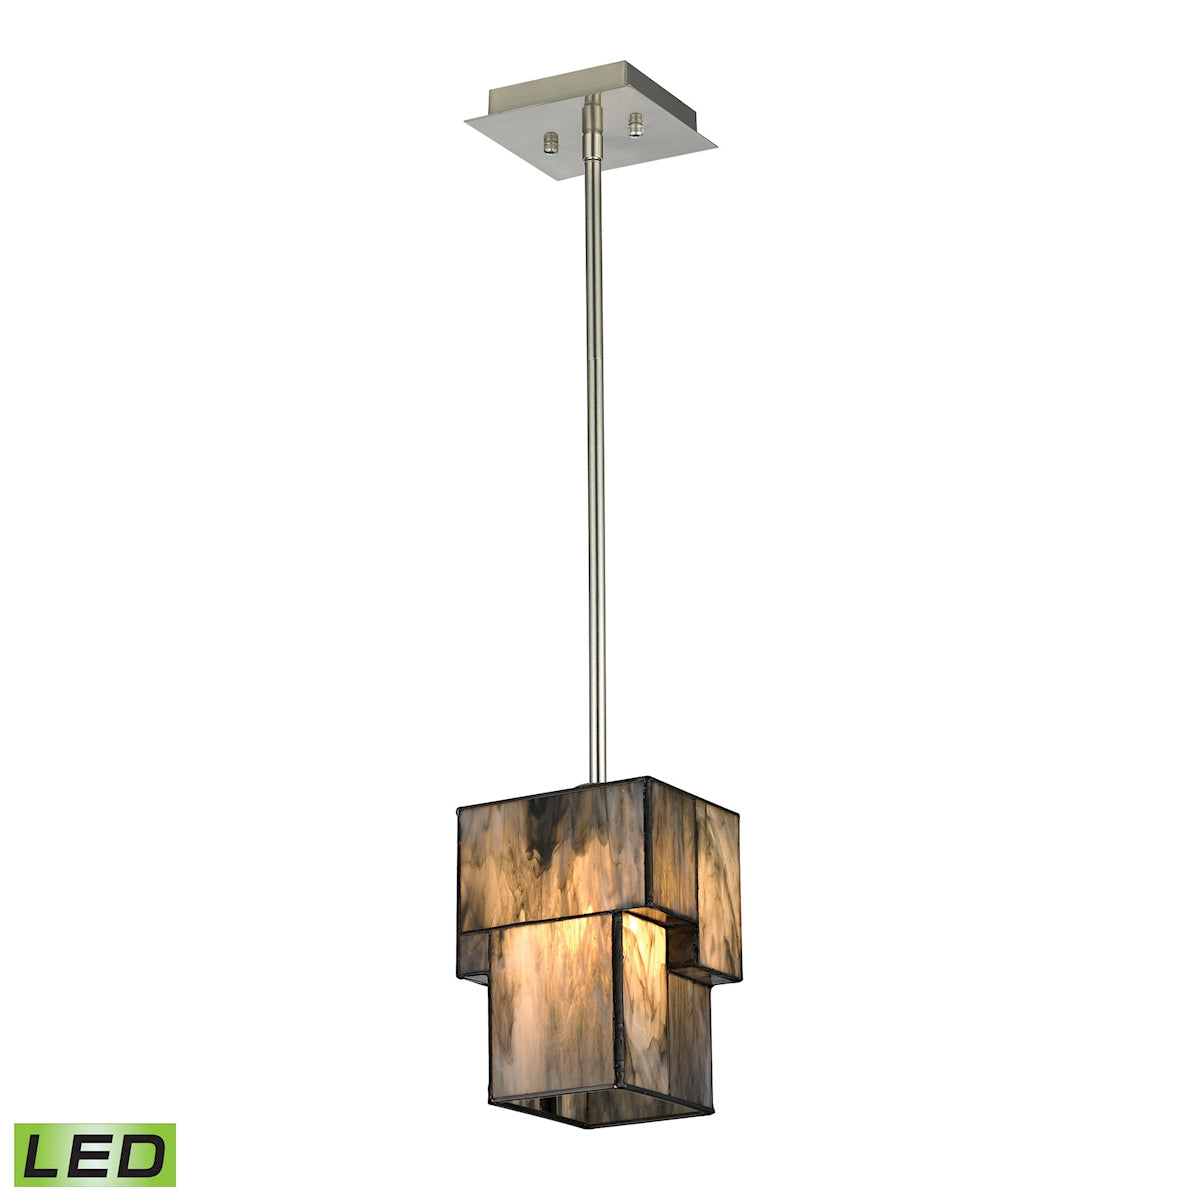 ELK Lighting 72072-1-LED Cubist 1-Light Mini Pendant in Brushed Nickel with White Tiffany Glass - Includes LED Bulb